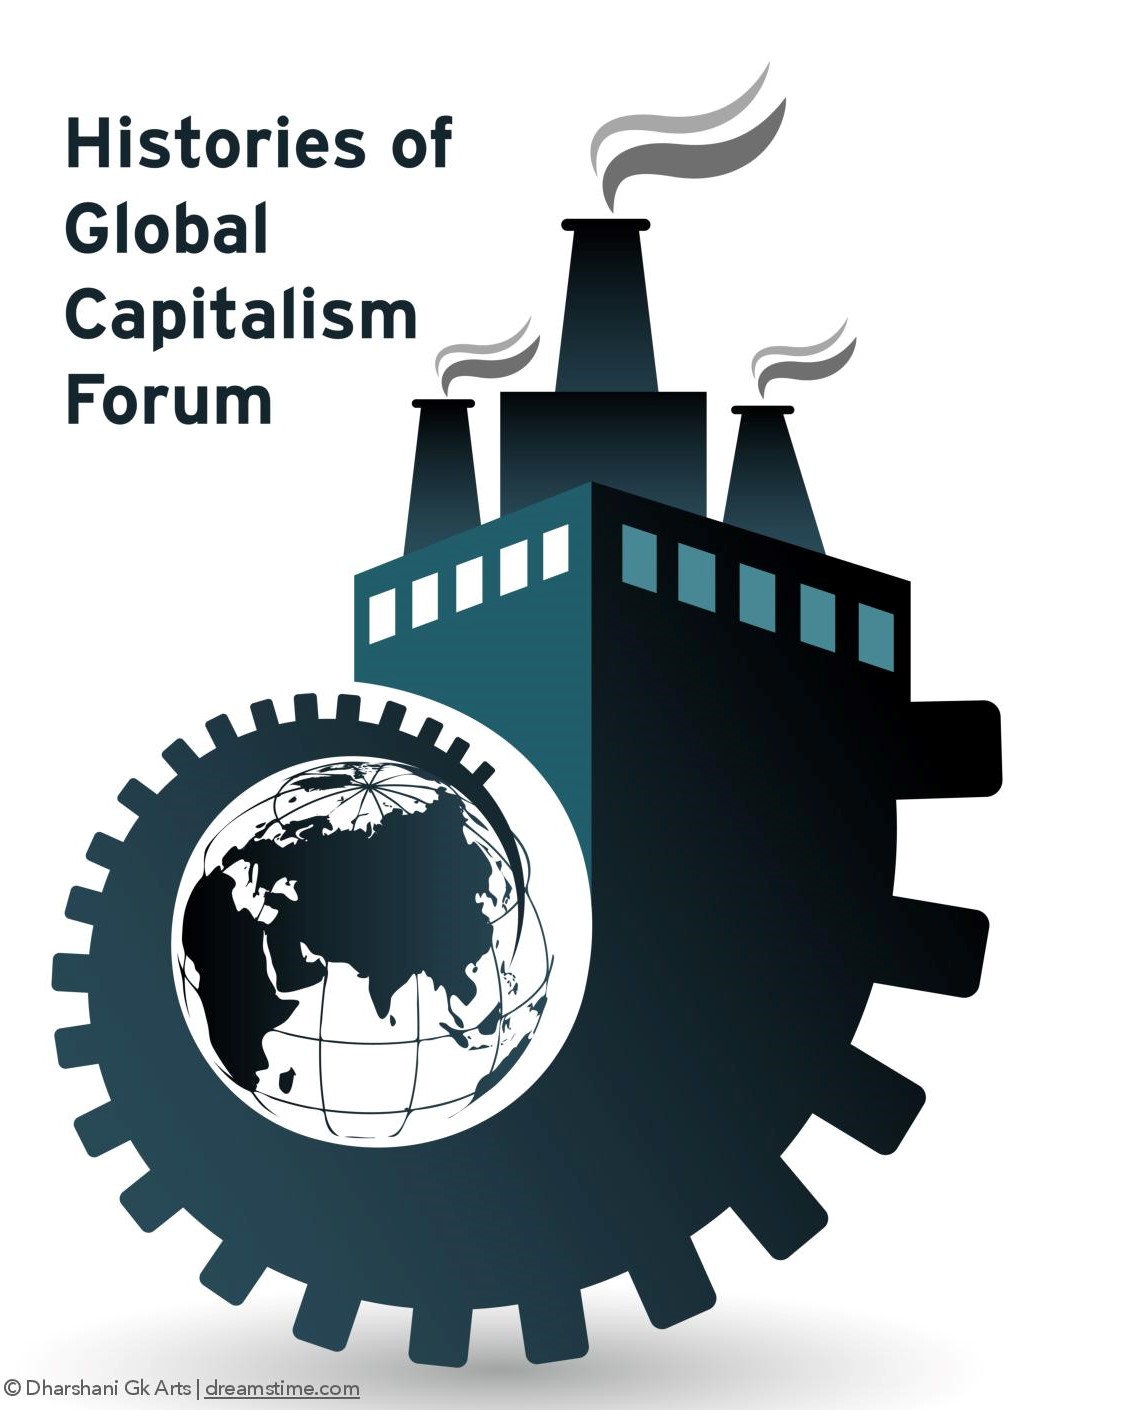 Image for event - Histories of Global Capitalism Forum: Capitalism and the COVID-19 Crisis